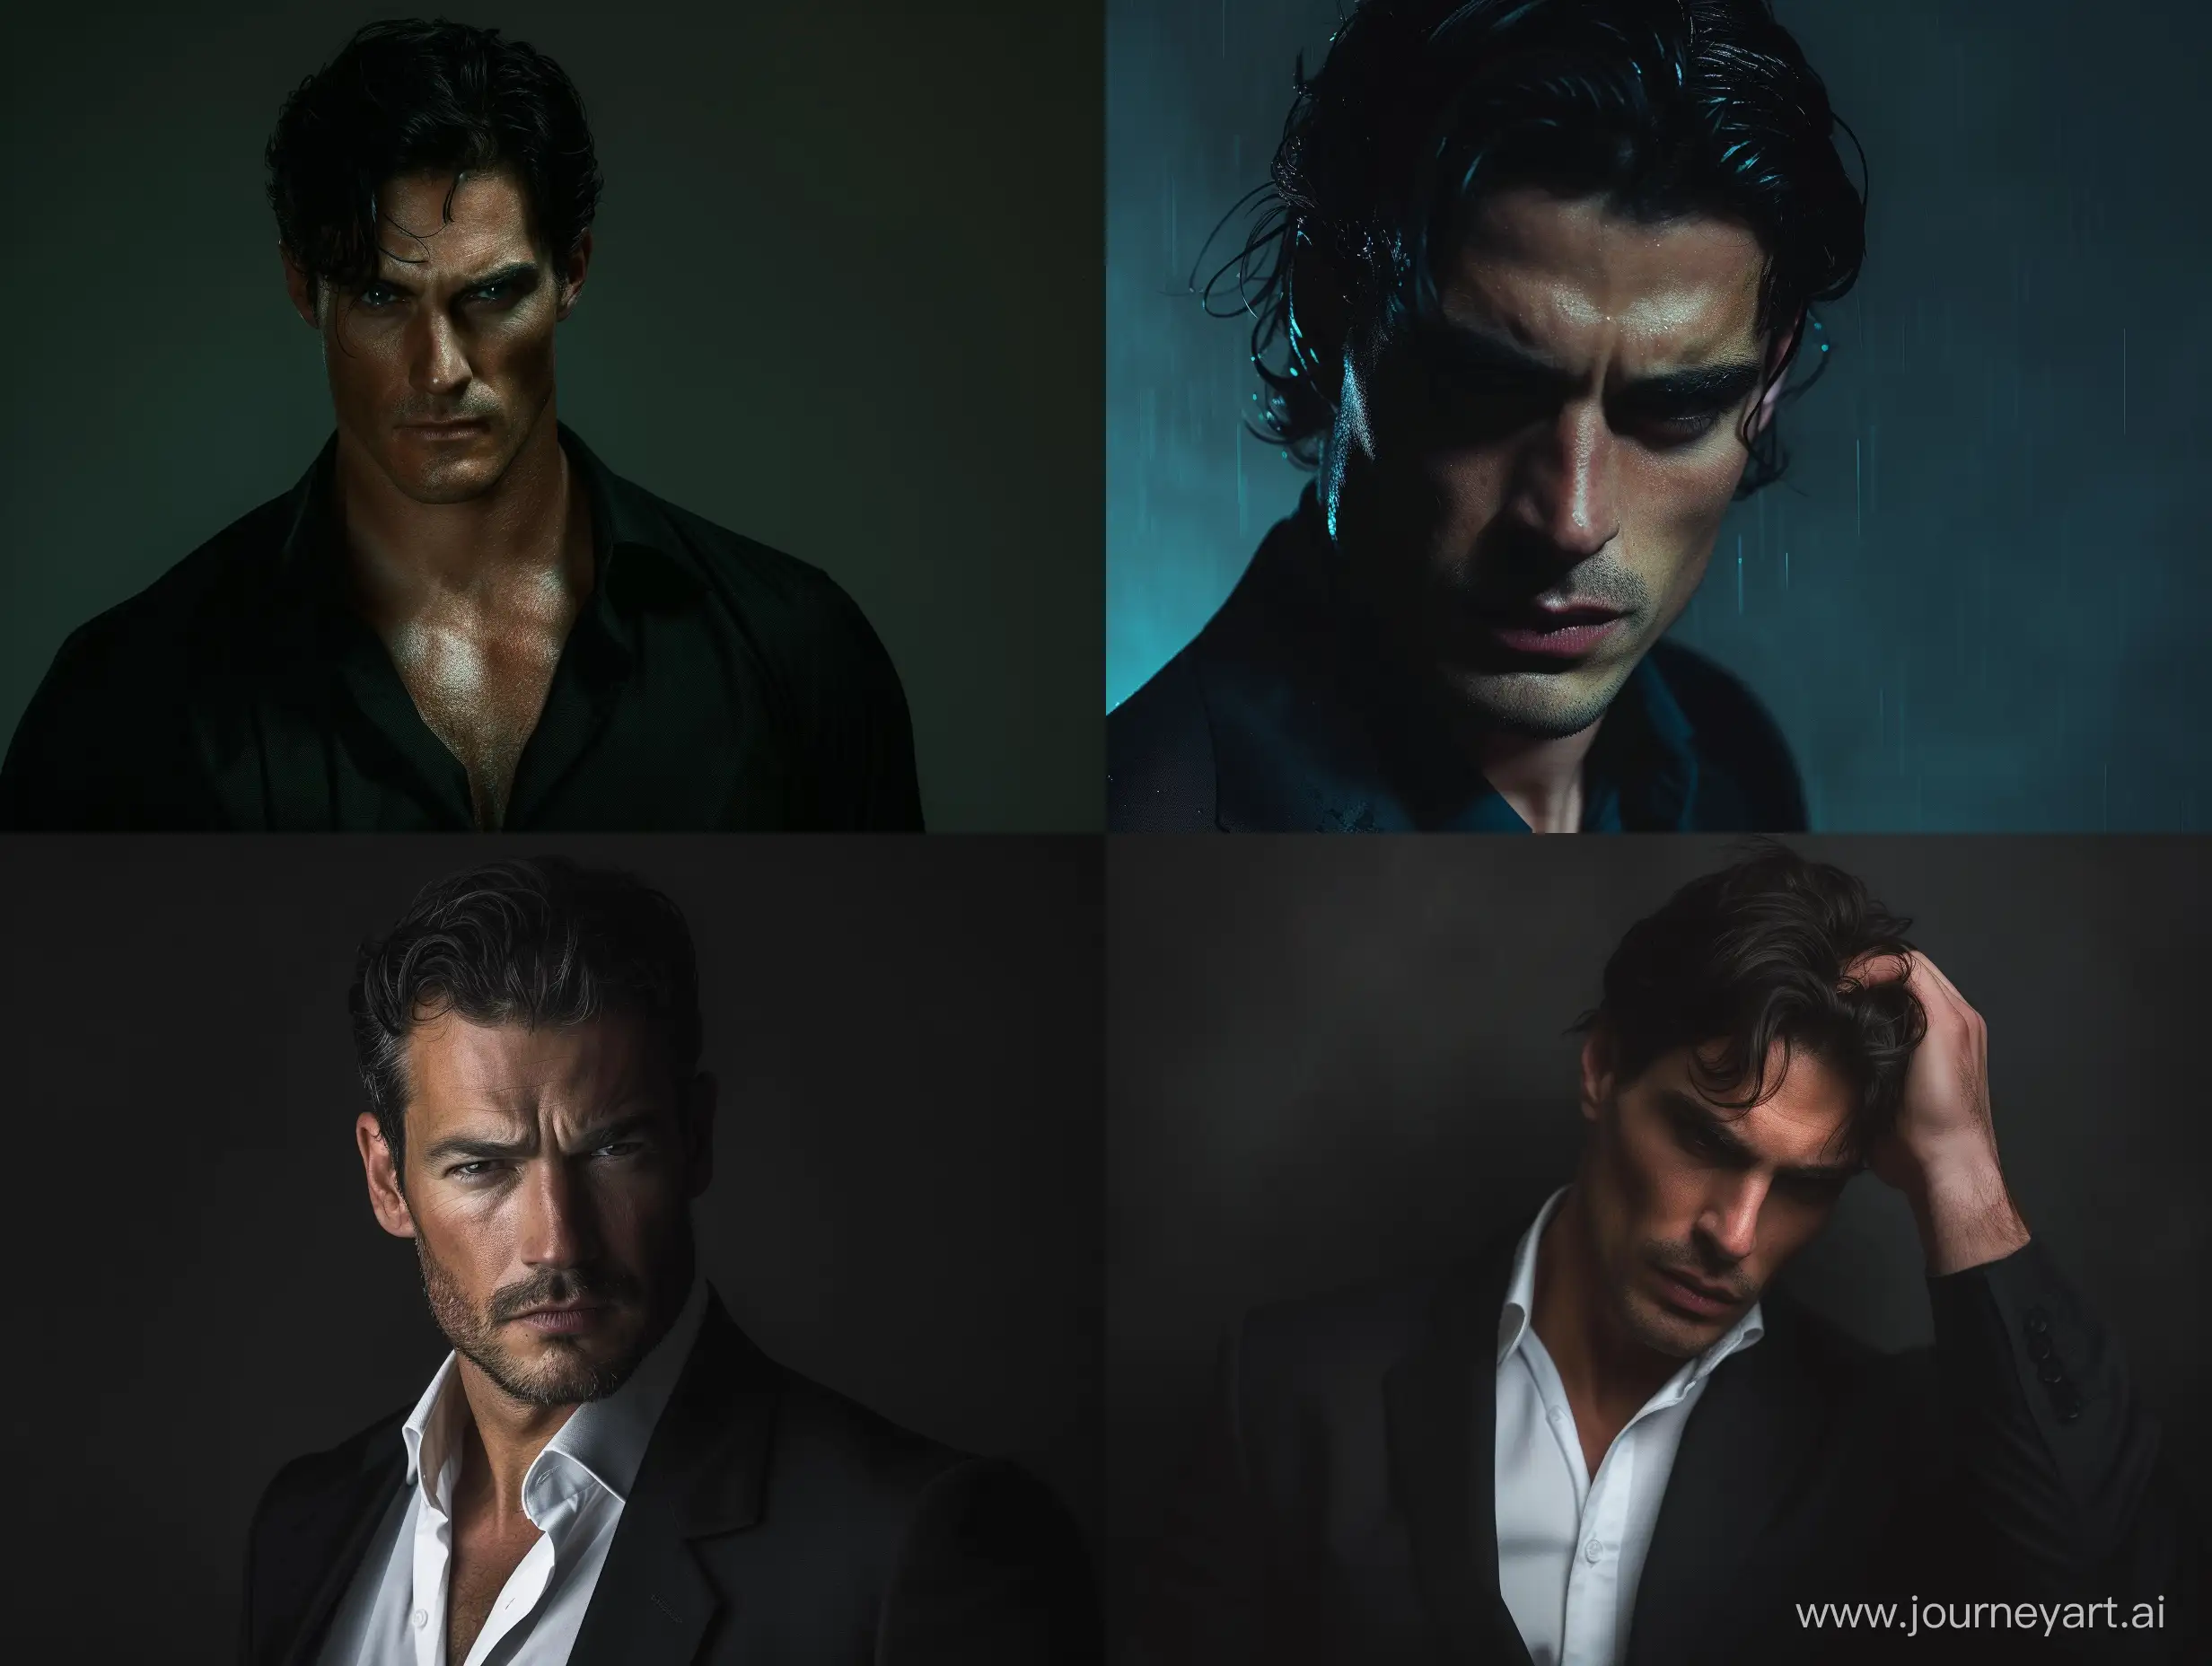 Muscular-40YearOld-Businessman-with-Dark-Hair-A-Handsome-and-Gloomy-Portrait